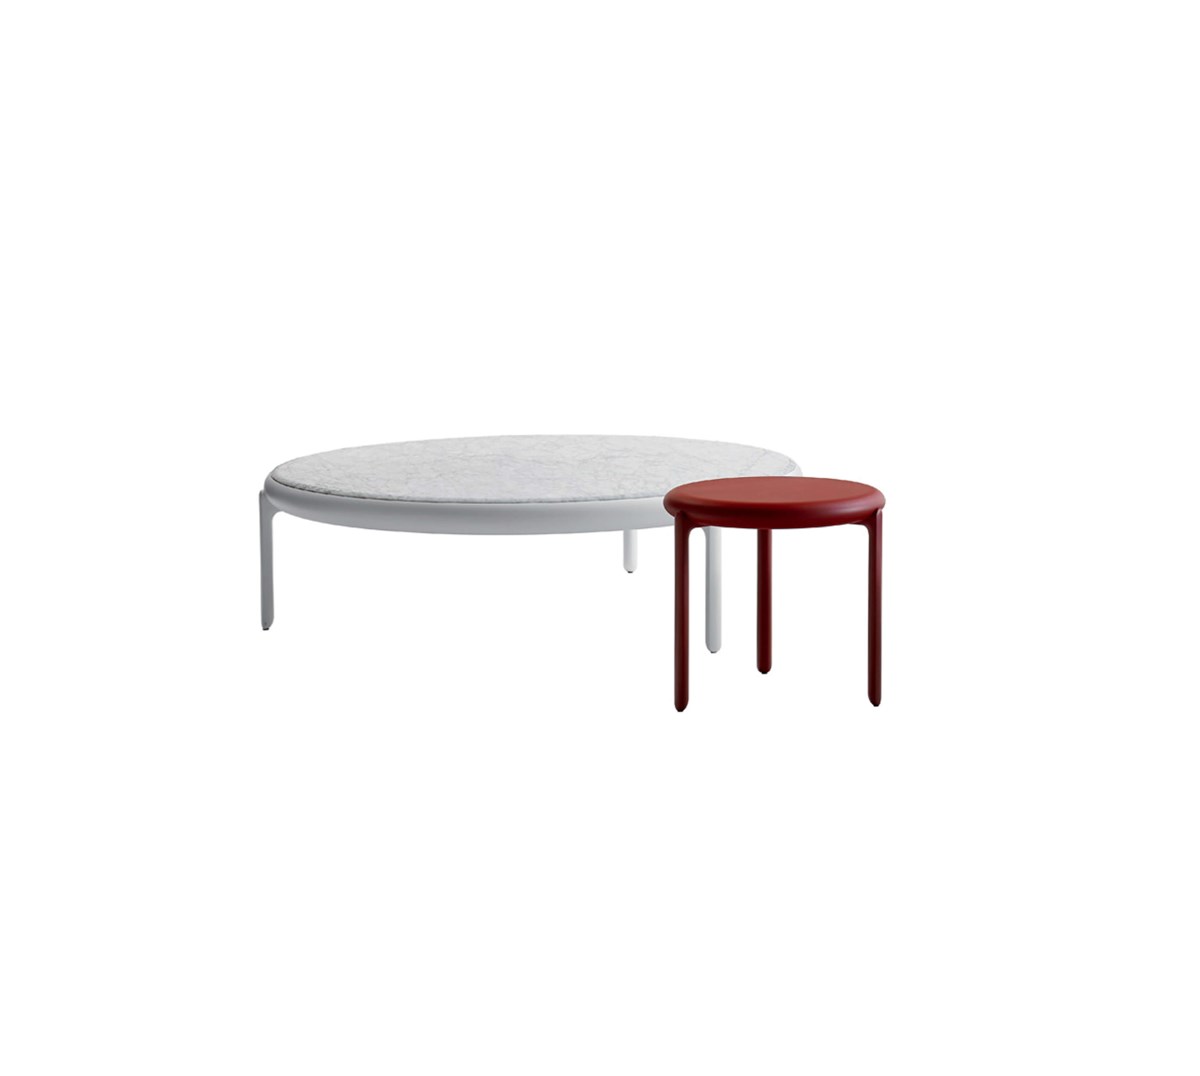 Thissest Living Design Directory Space Maru Coffee Table4